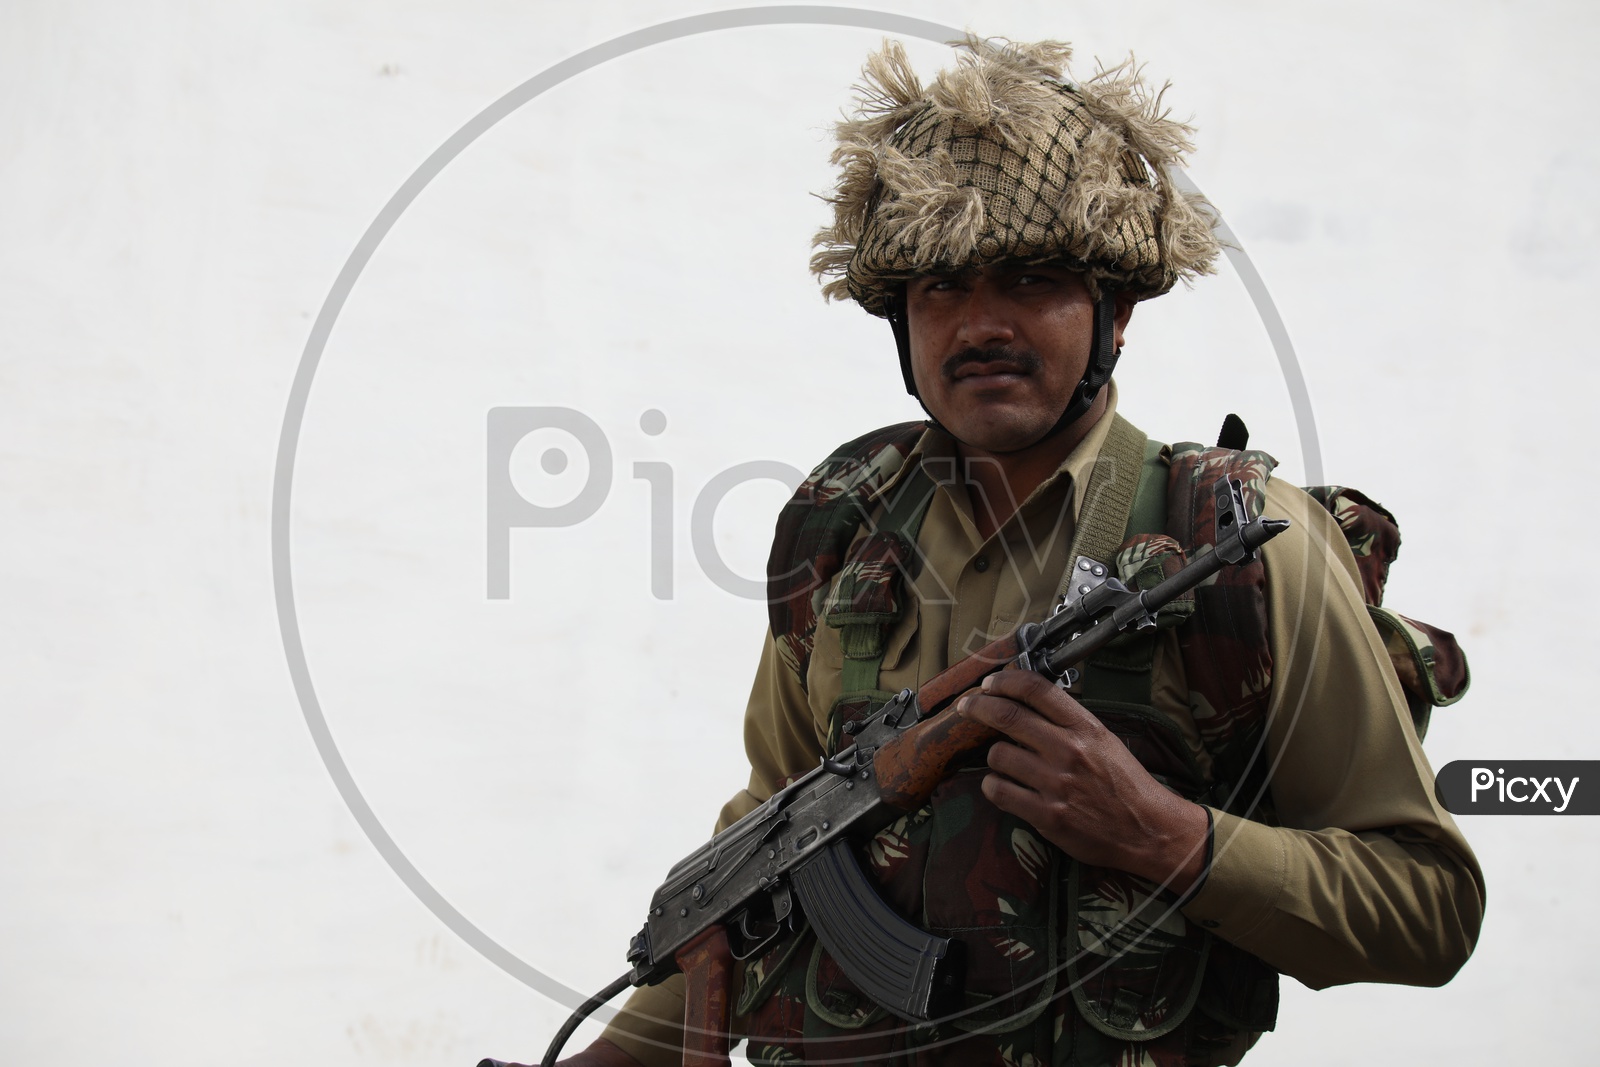 Indian Army Soldier at Indian Army Day Celebrations at Parade Ground in Delhi